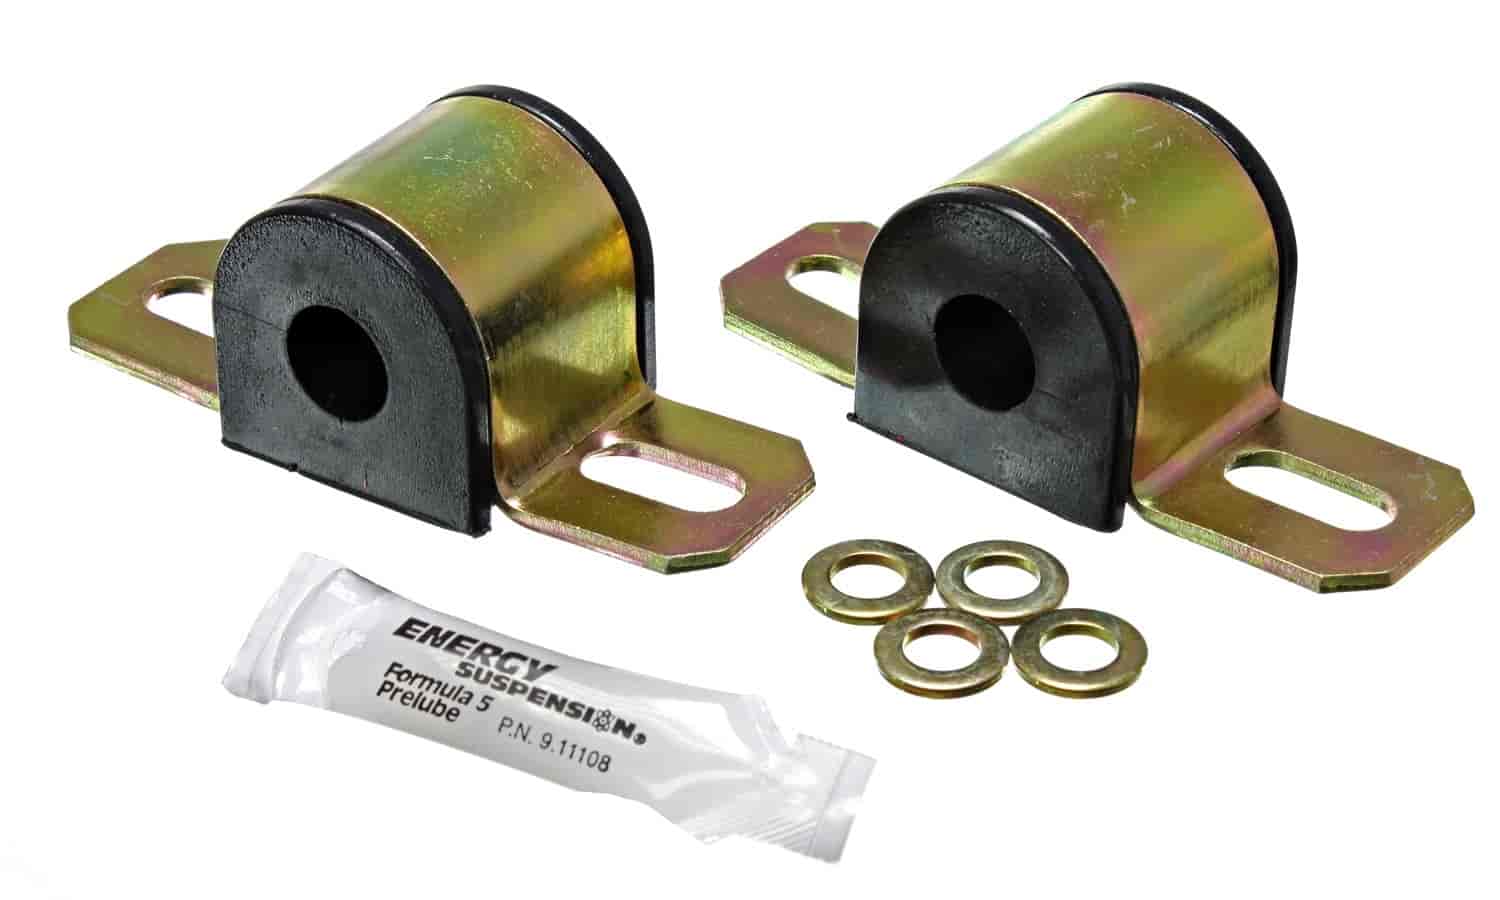 Universal Non-Greaseable Sway Bar Bushings 7/16" or 11mm